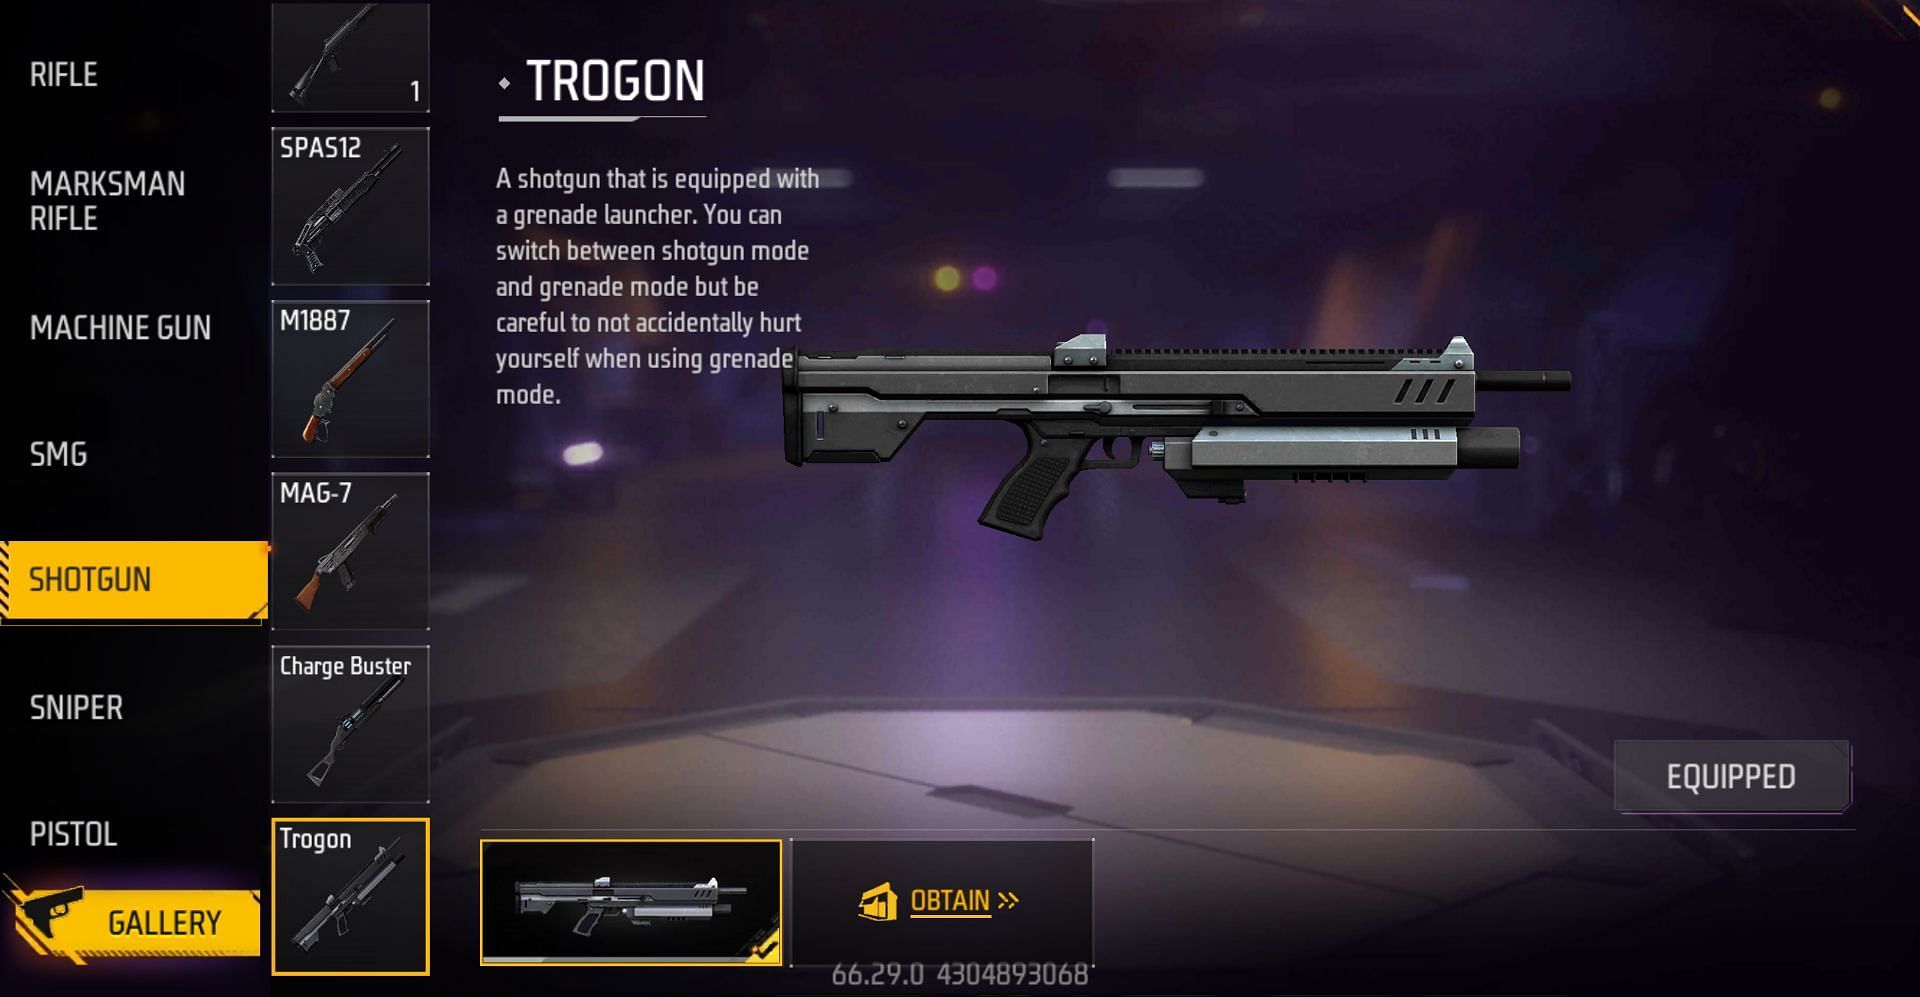 Trogon is the new weapon and it has two different modes: Shotgun and Grenade (Image via Garena)